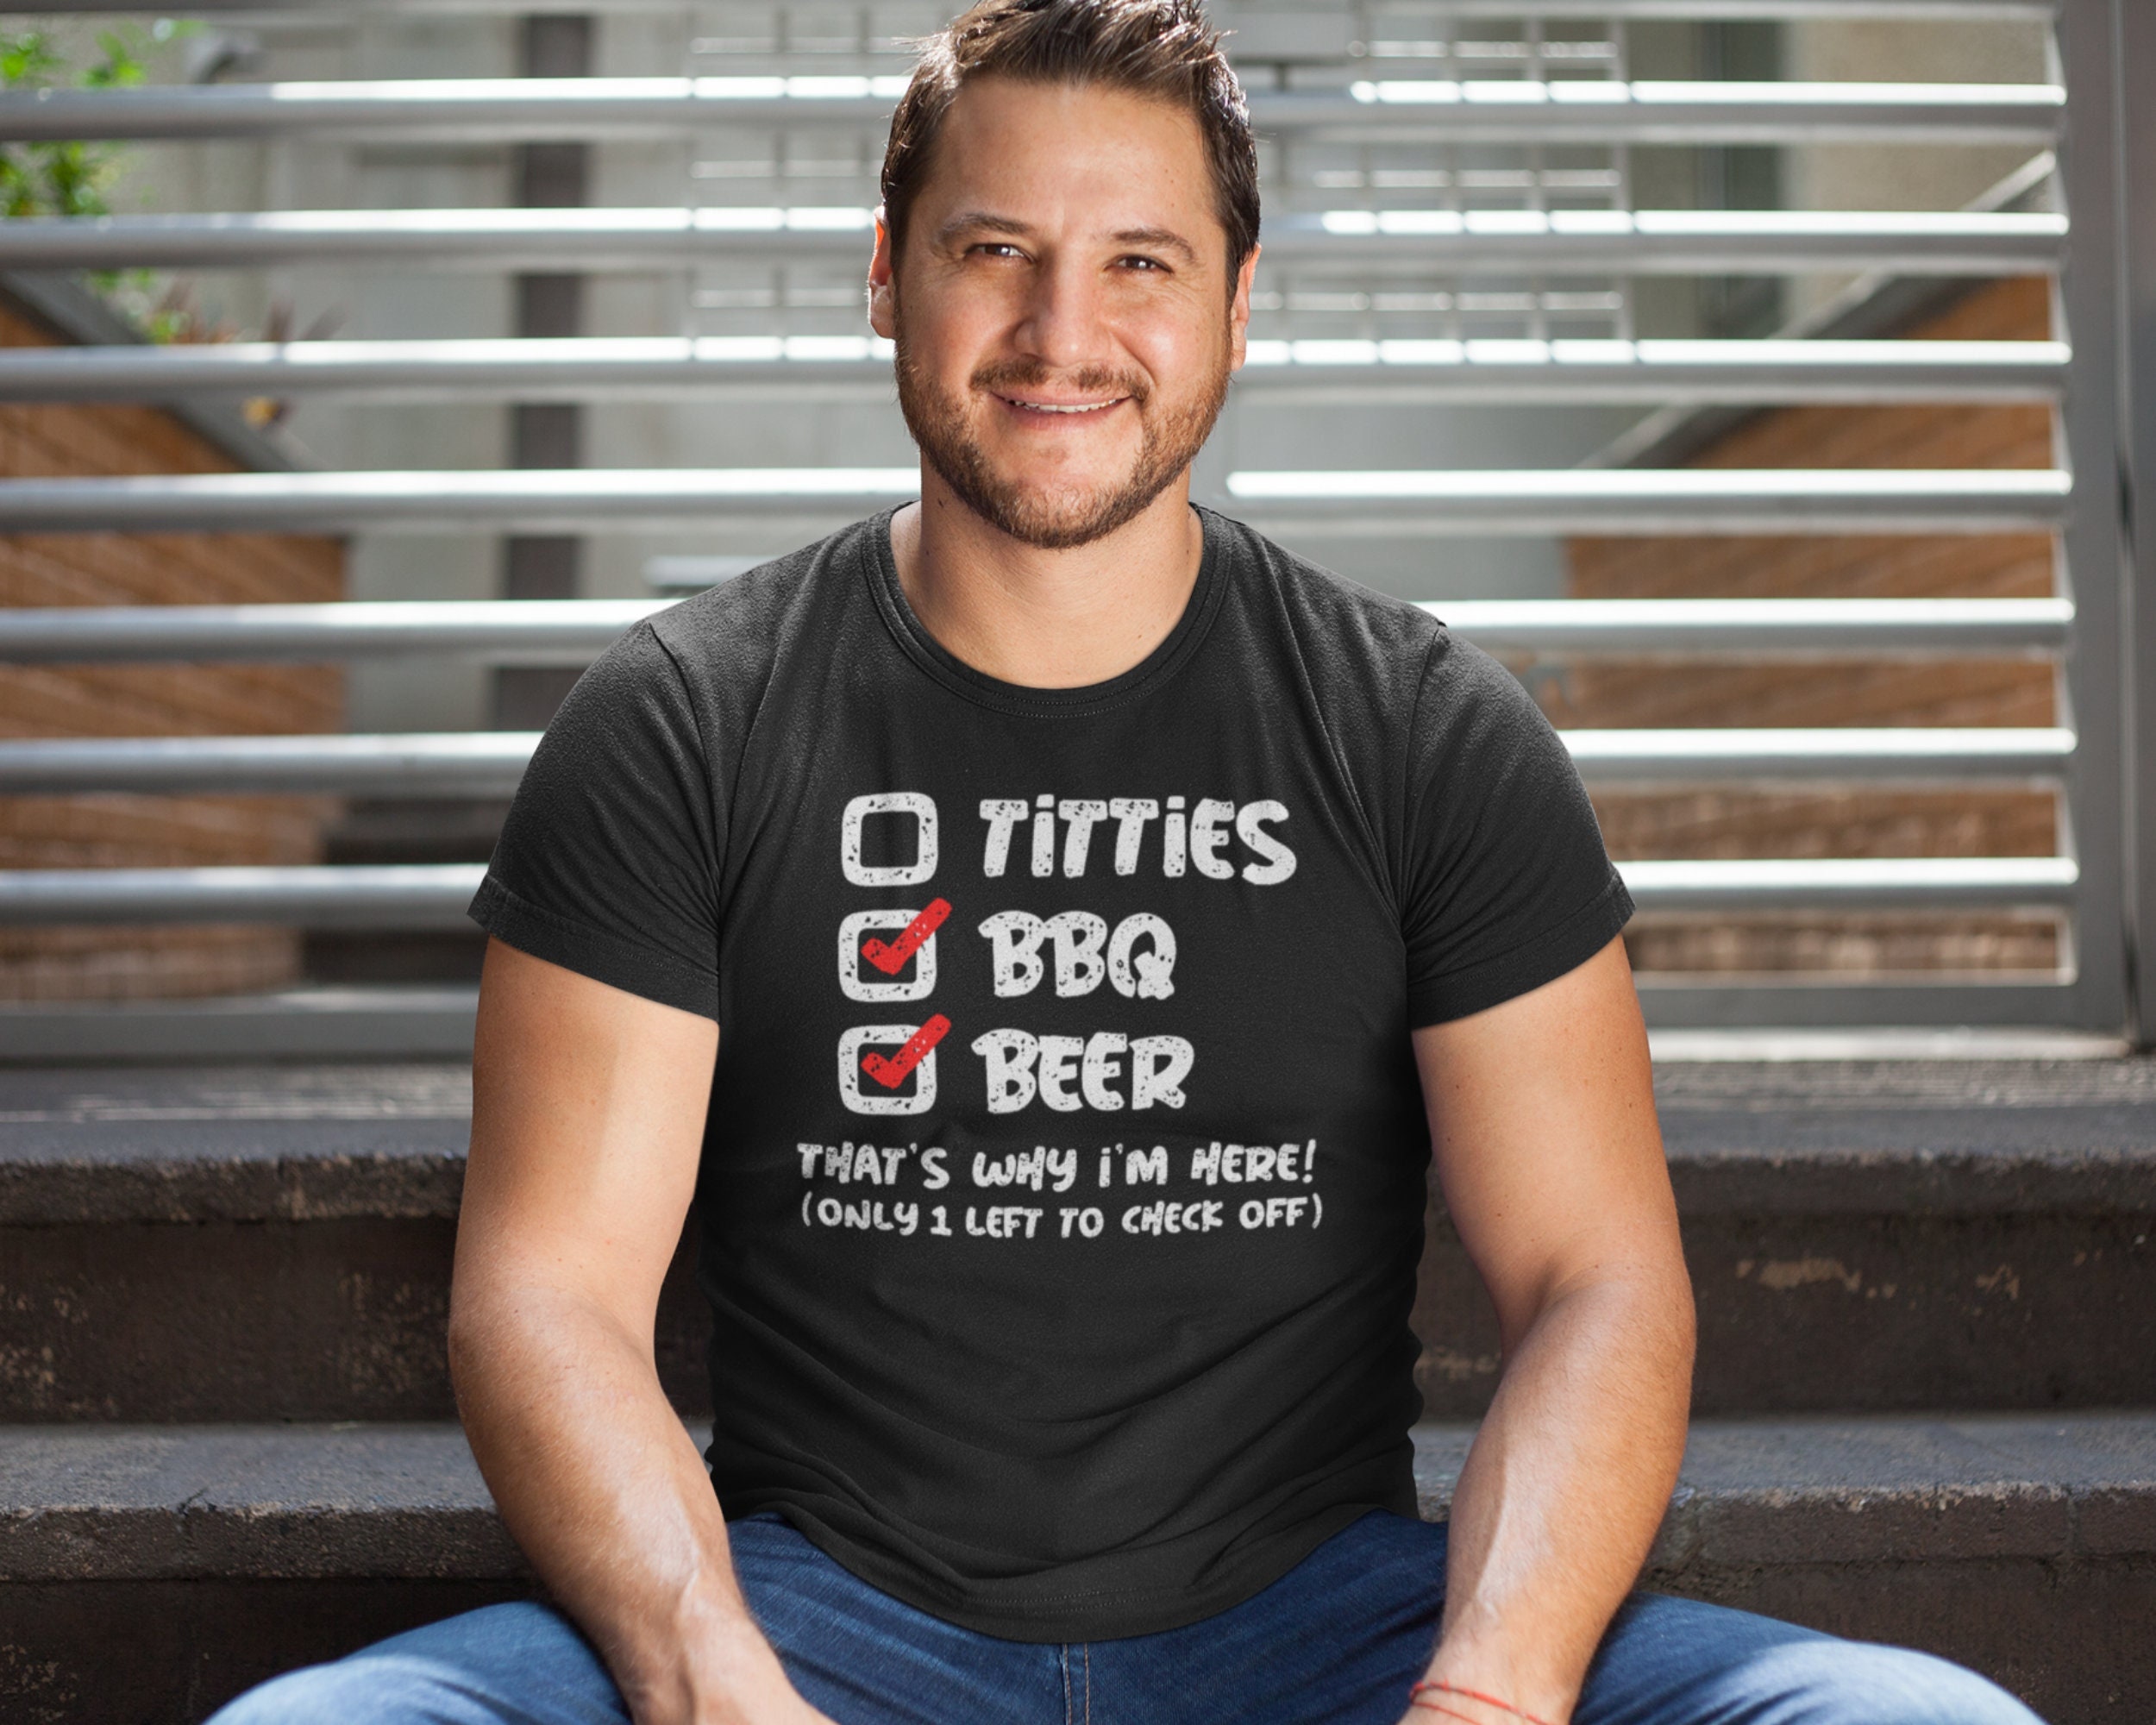 Titties, BBQ, and Beer - Barbecue Shirts - Gifts for BBQ Lovers - I Love  Grilling Meat